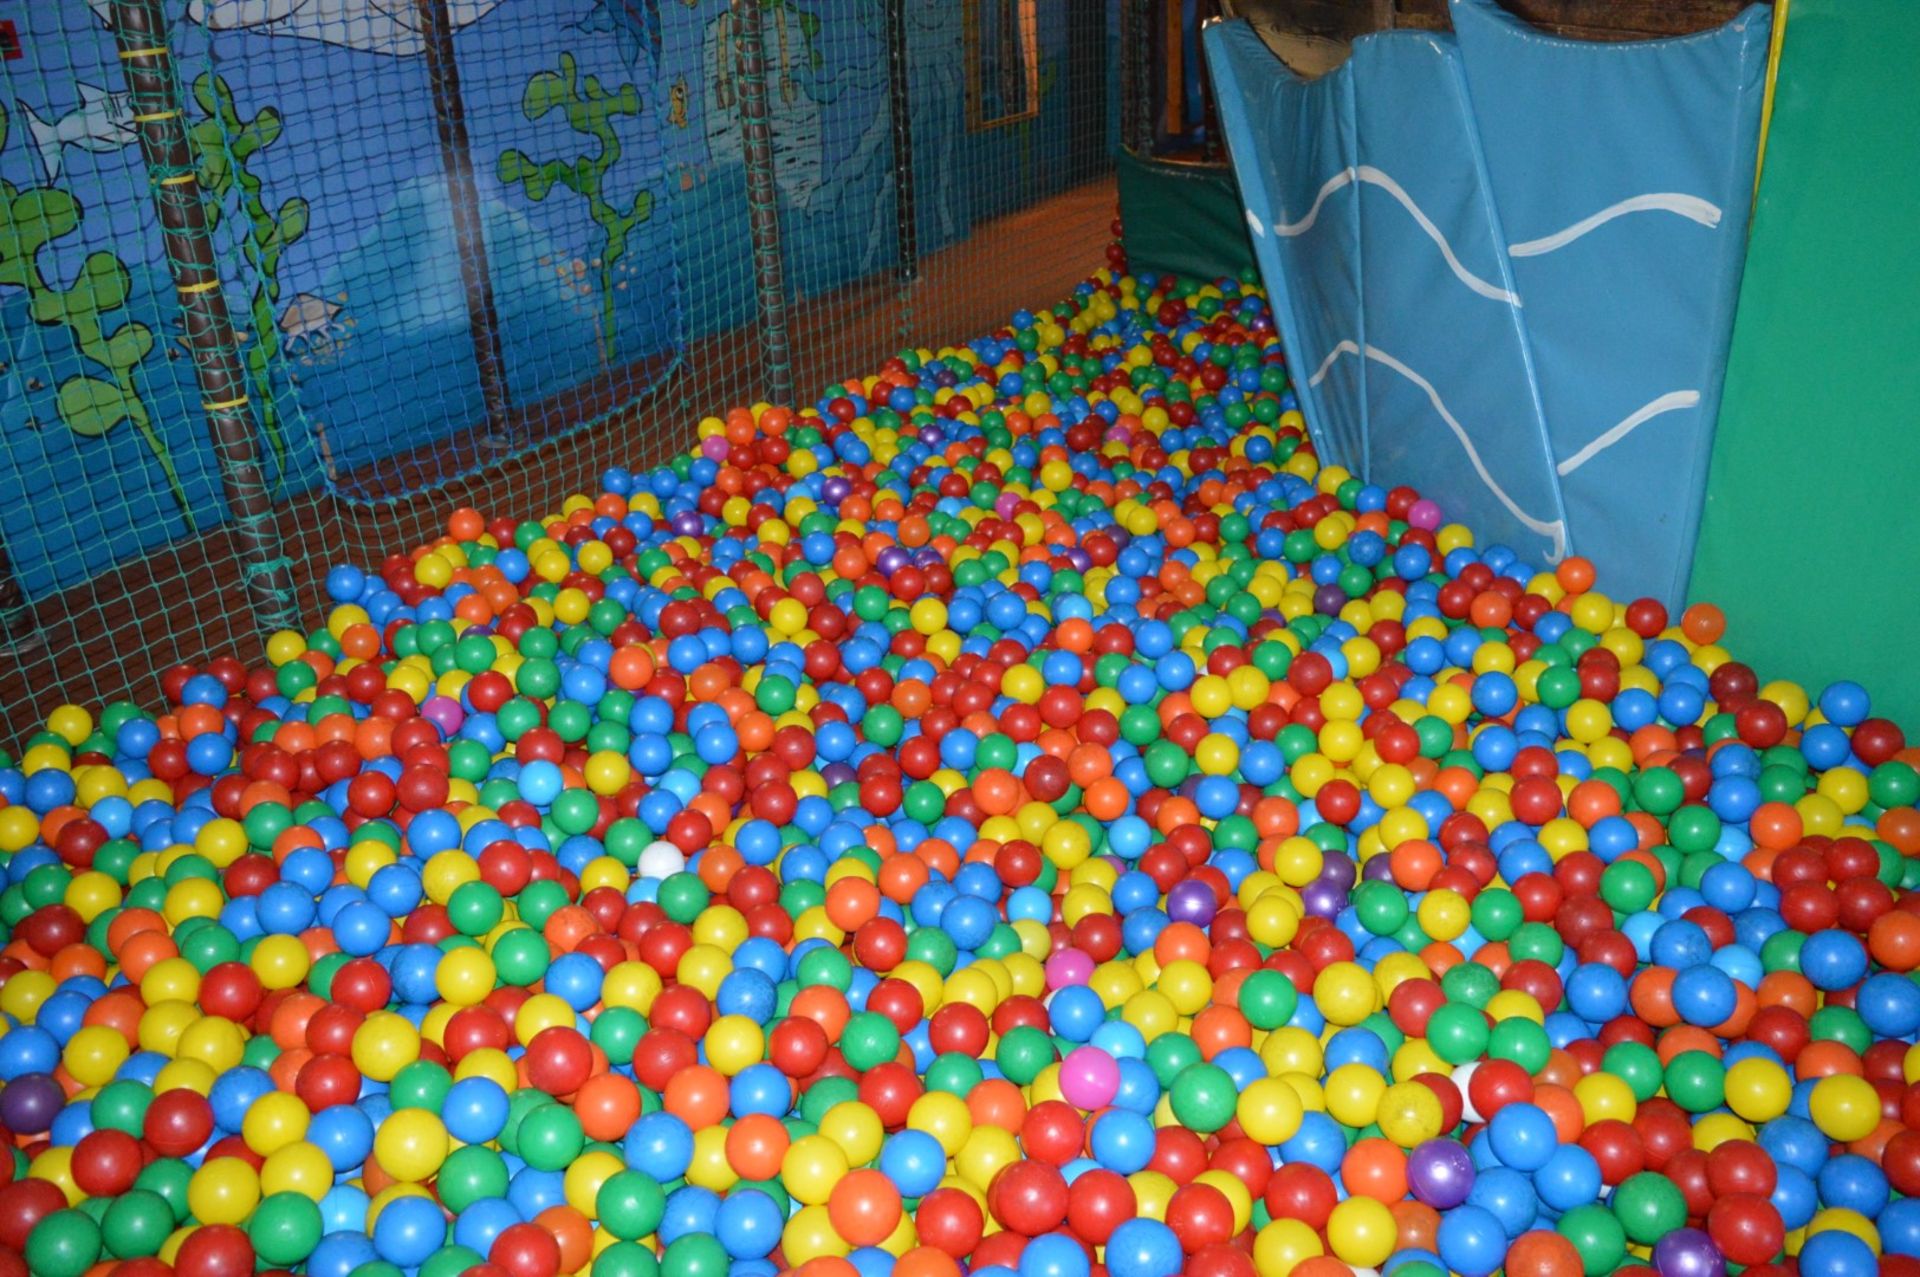 1 x Huge Amount of Childrens Play Balls From Childrens Playcentre in Good Condition - Ref PTP - - Image 6 of 7